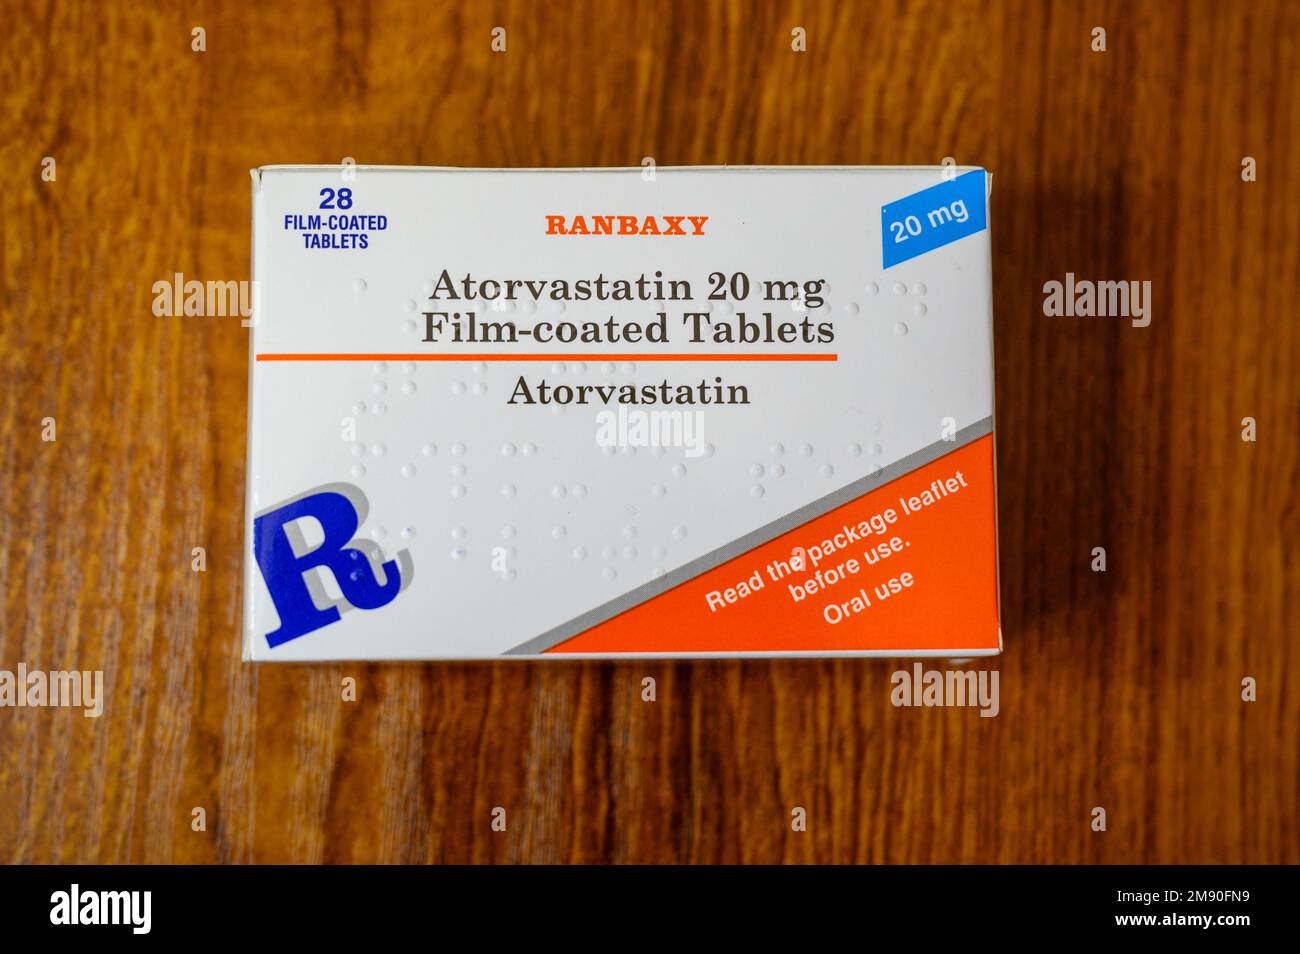 Atorvastatin 20 mg film coated tablets for the control of cholesterol levels. Stock Photo